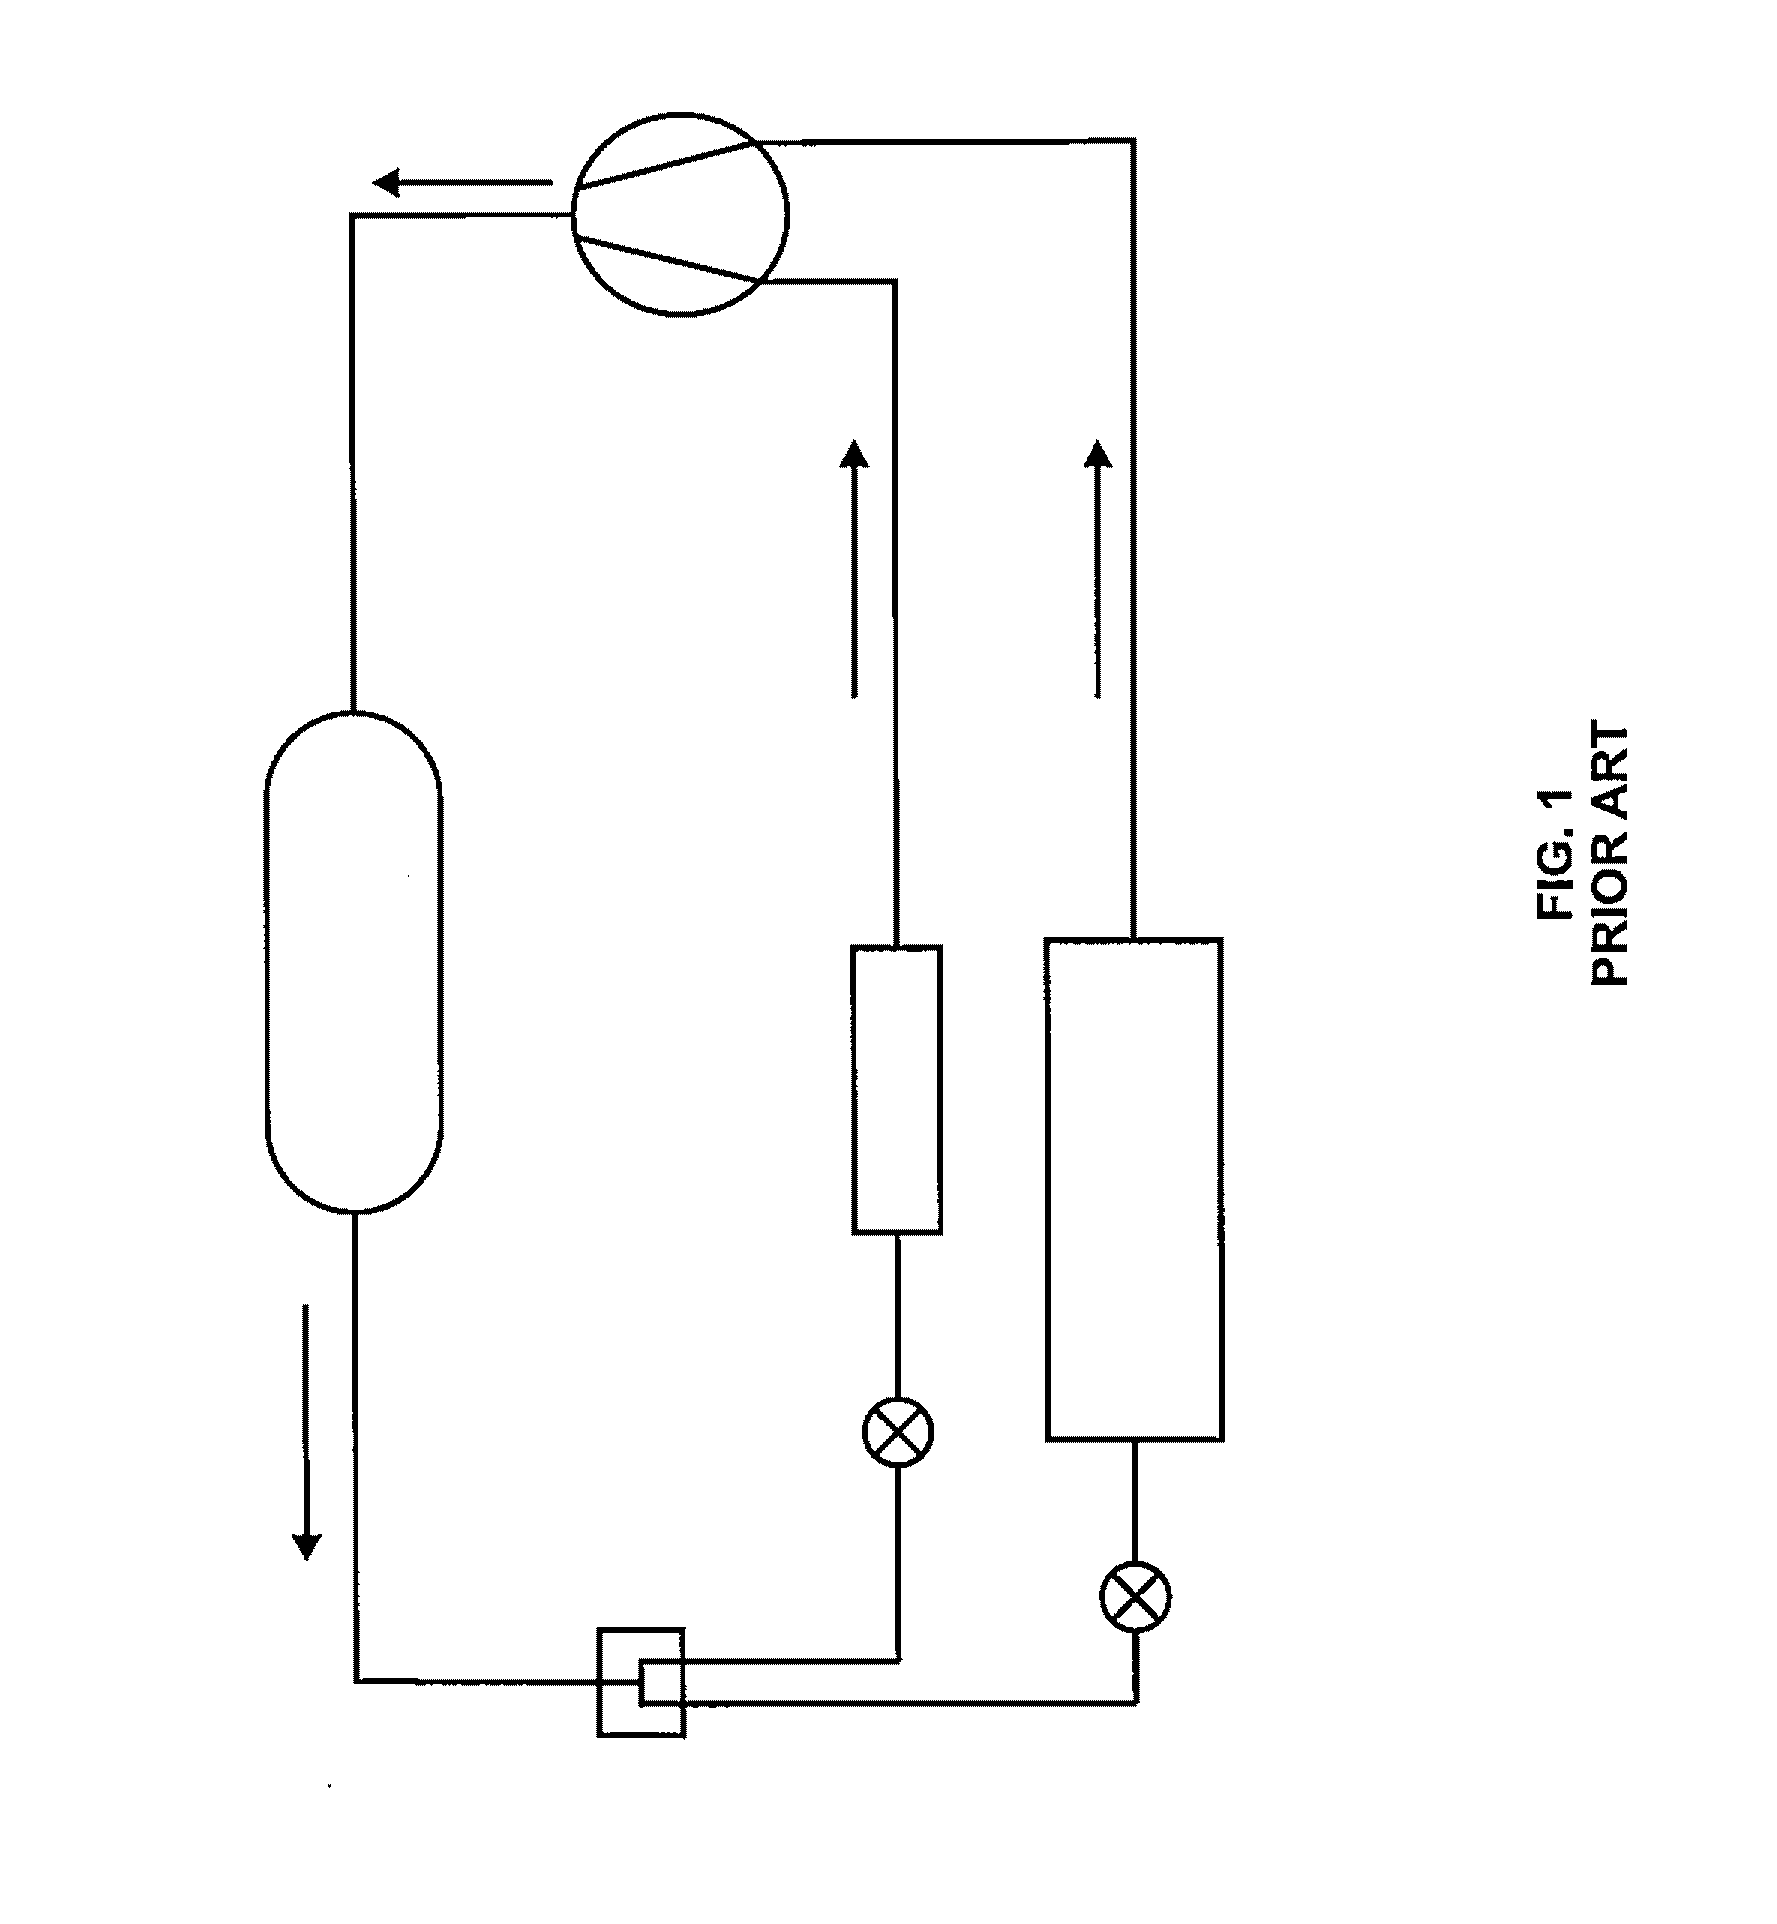 Refrigeration System Including Evaporators Associated in Parallel